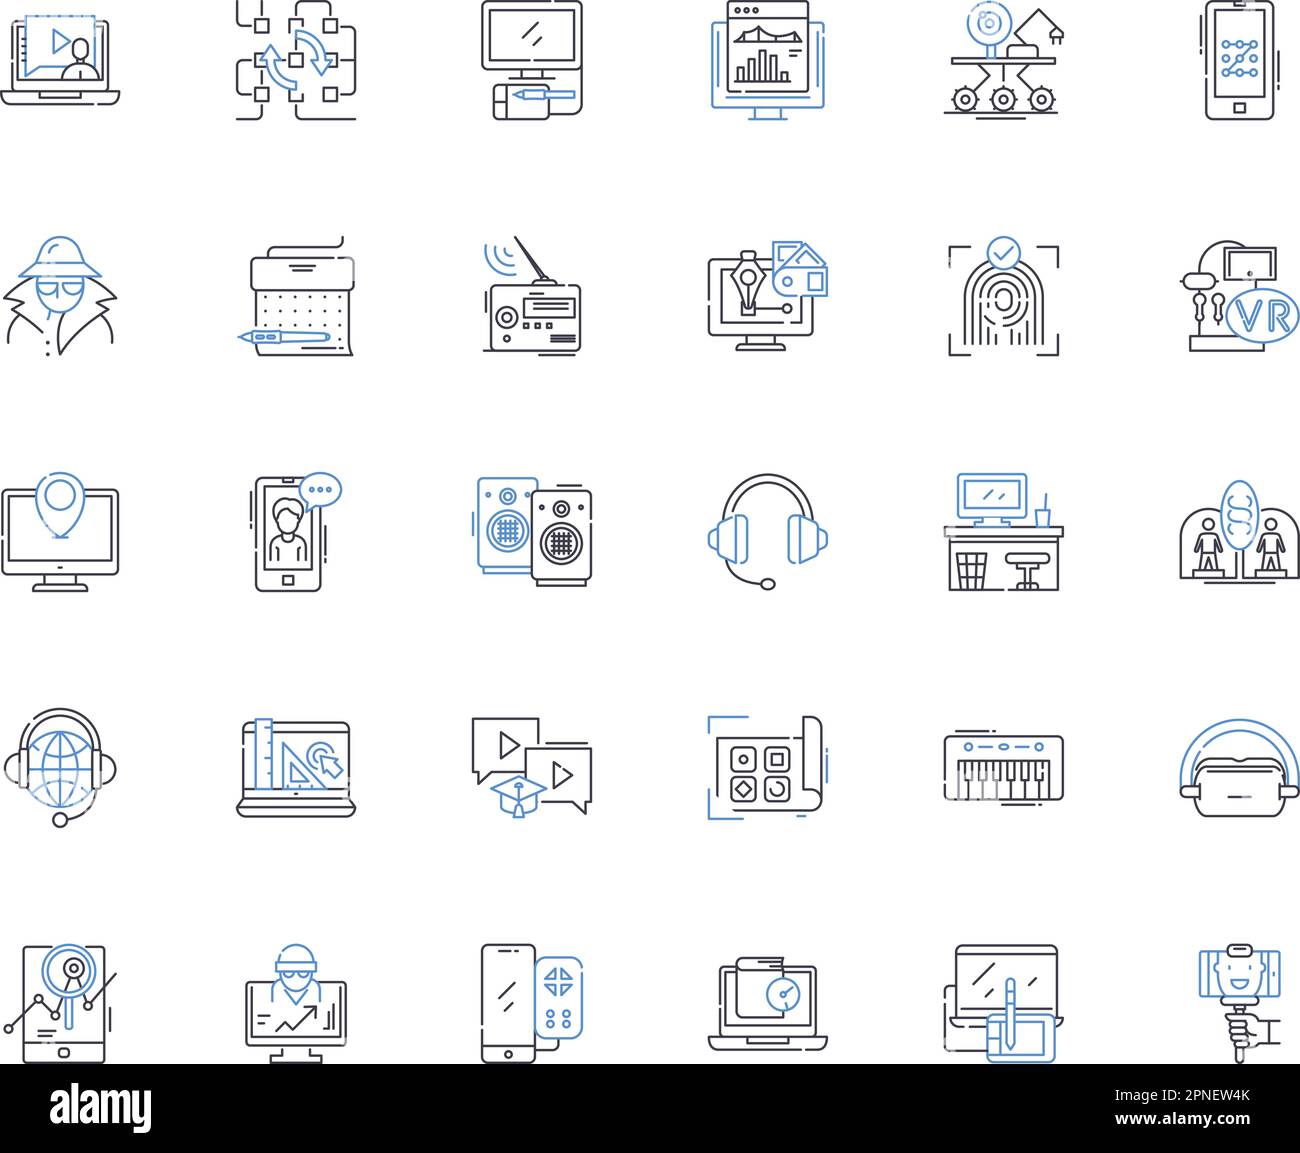 High-tech gadgets line icons collection. Smartph, Tablet, Smartwatch, Laptop, Dr, VR, AR vector and linear illustration. Smart home,Wearable,Robot Stock Vector